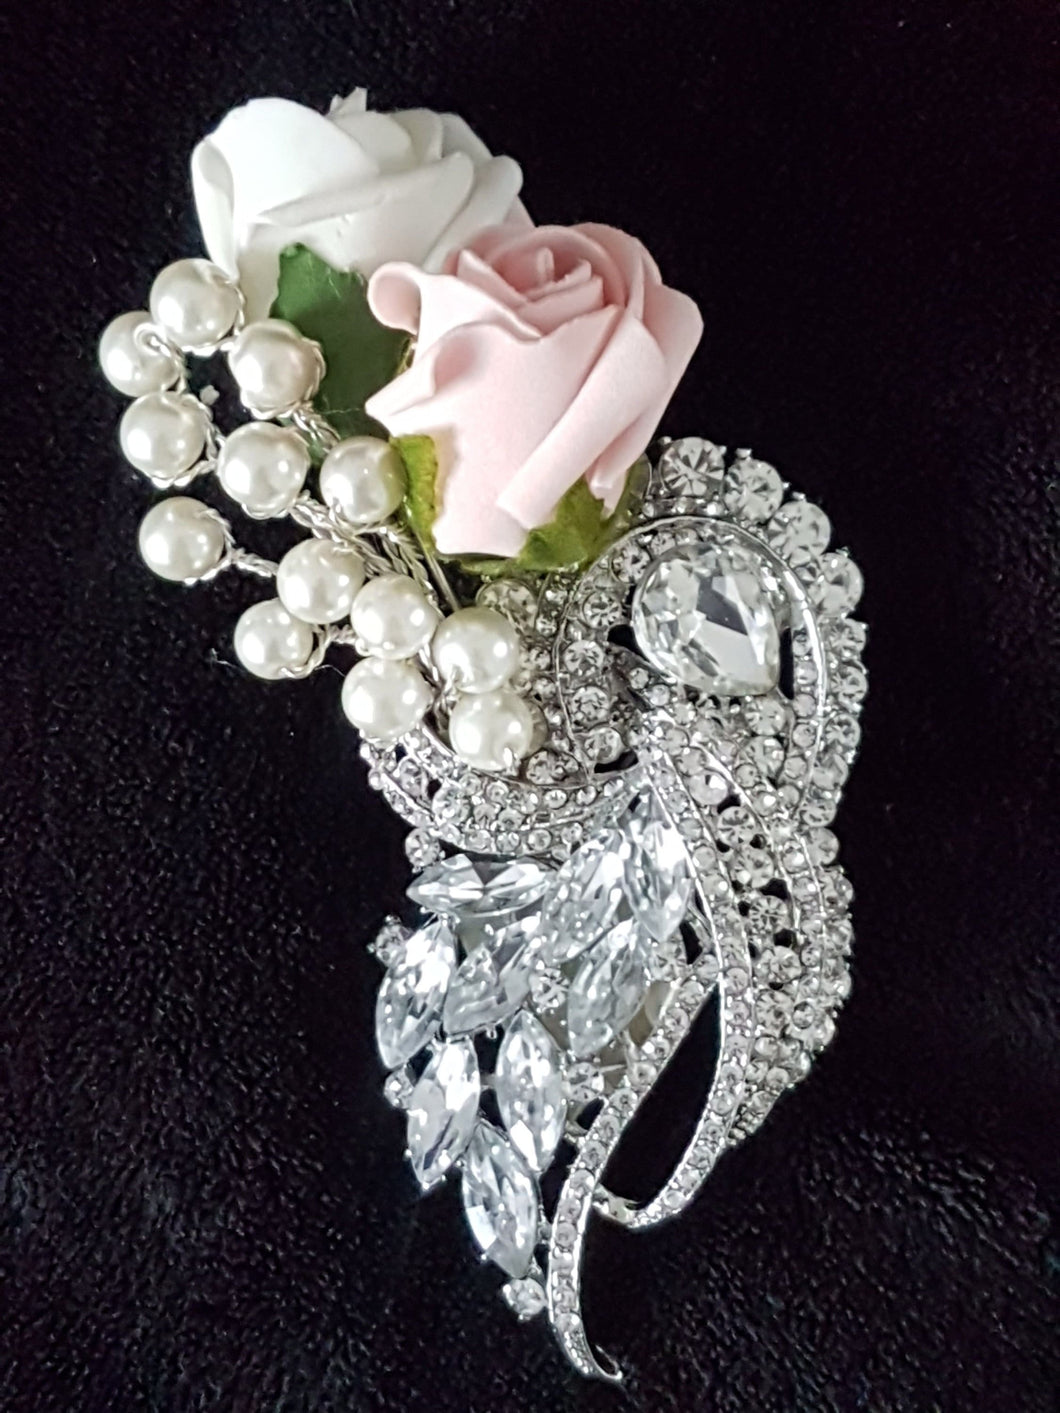 Crystal brooch  buttonhole  with Pearls & Foam roses by Crystal wedding uk